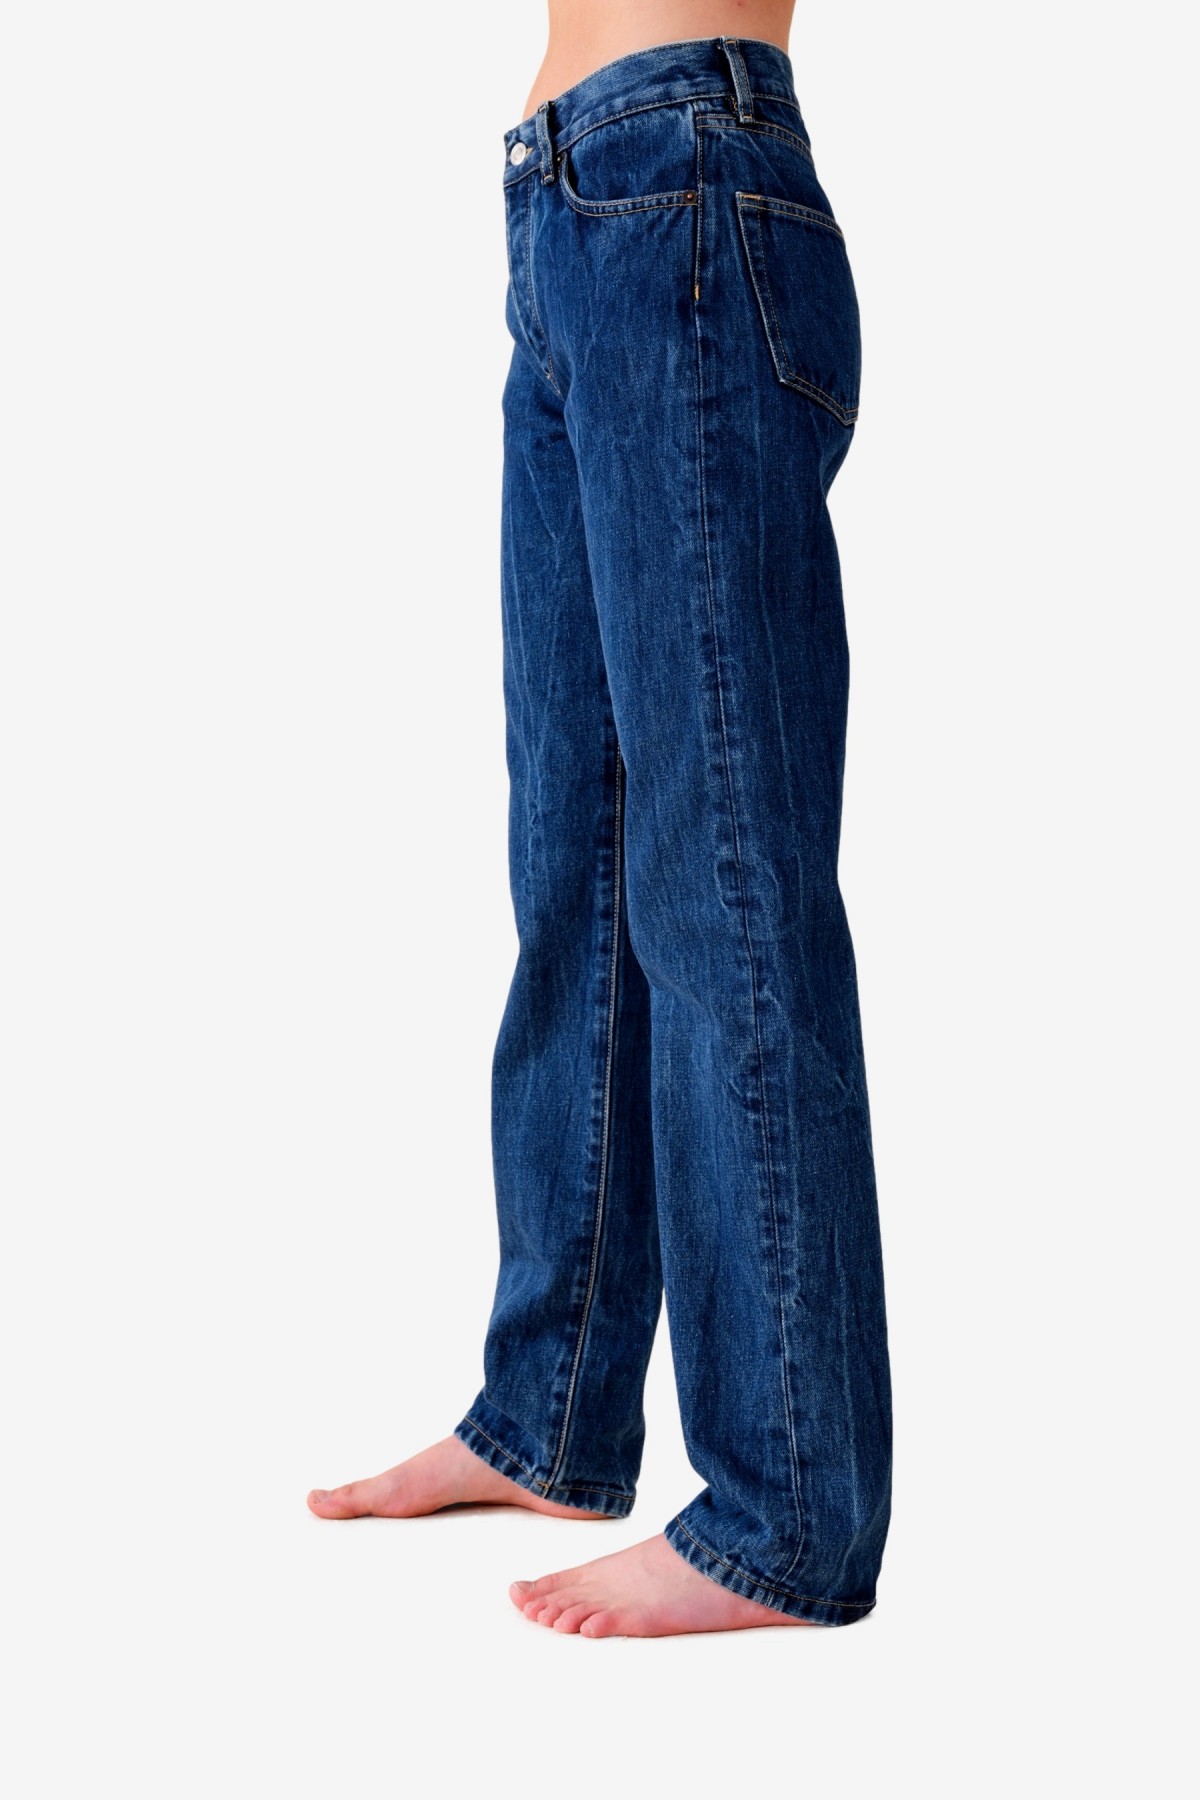 Jeanerica RW005 Rodeo Jeans in Blue Vein